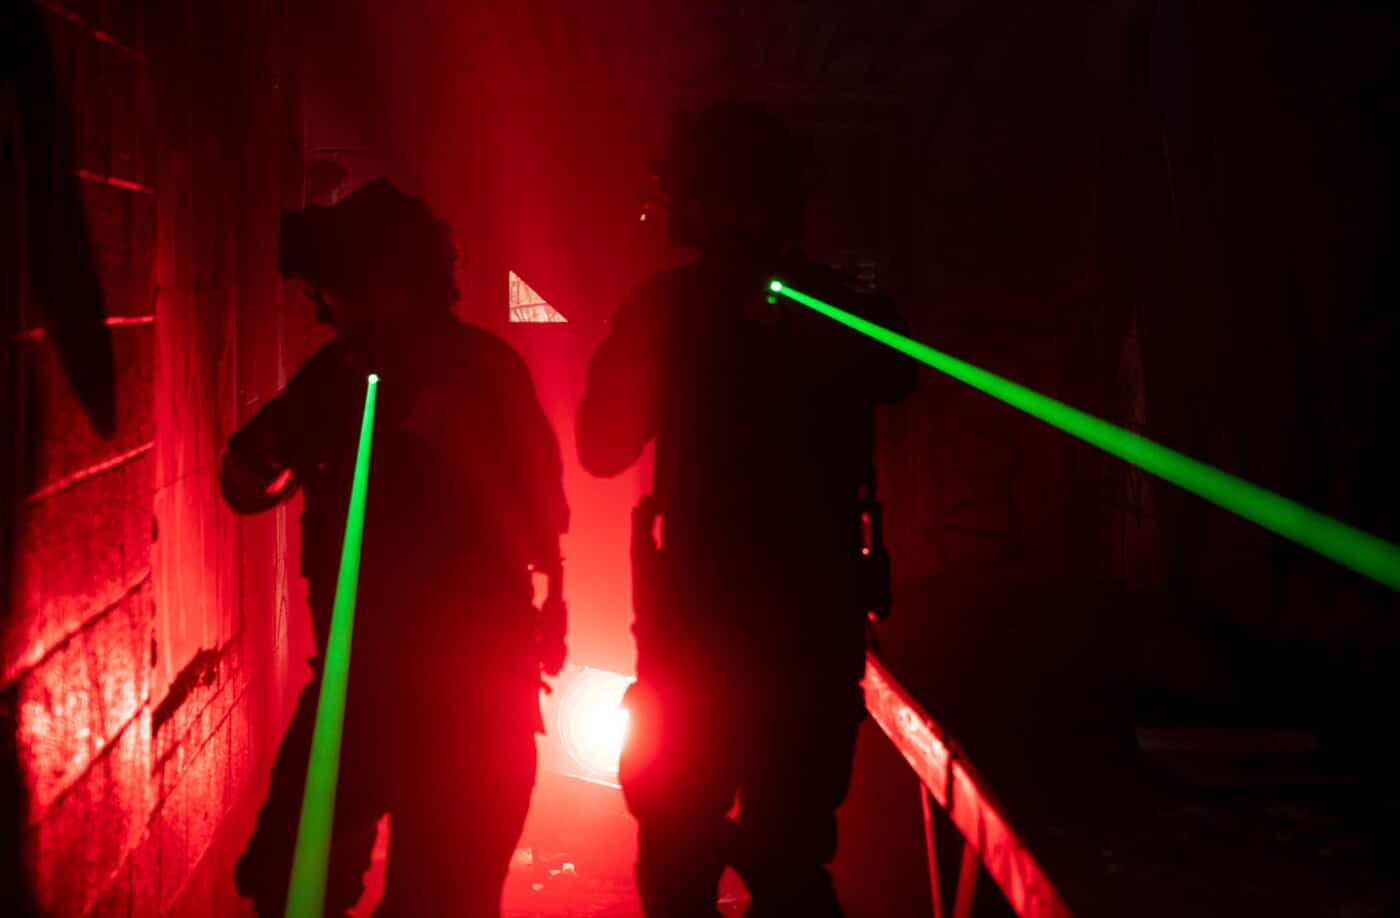 Police using green lasers mounted on rifles